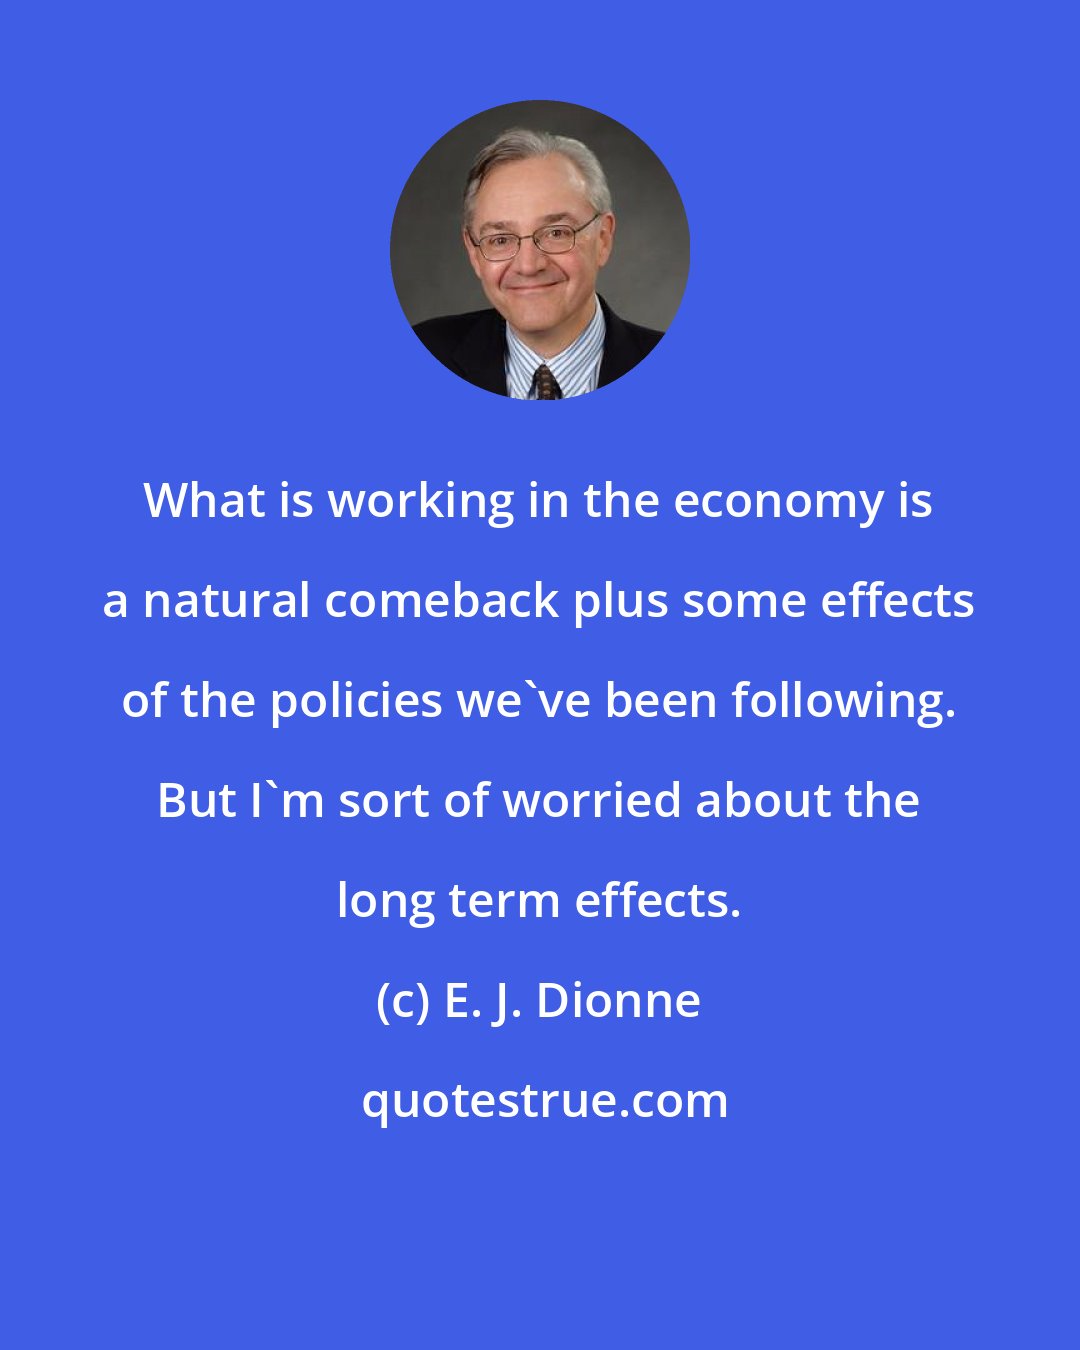 E. J. Dionne: What is working in the economy is a natural comeback plus some effects of the policies we've been following. But I'm sort of worried about the long term effects.